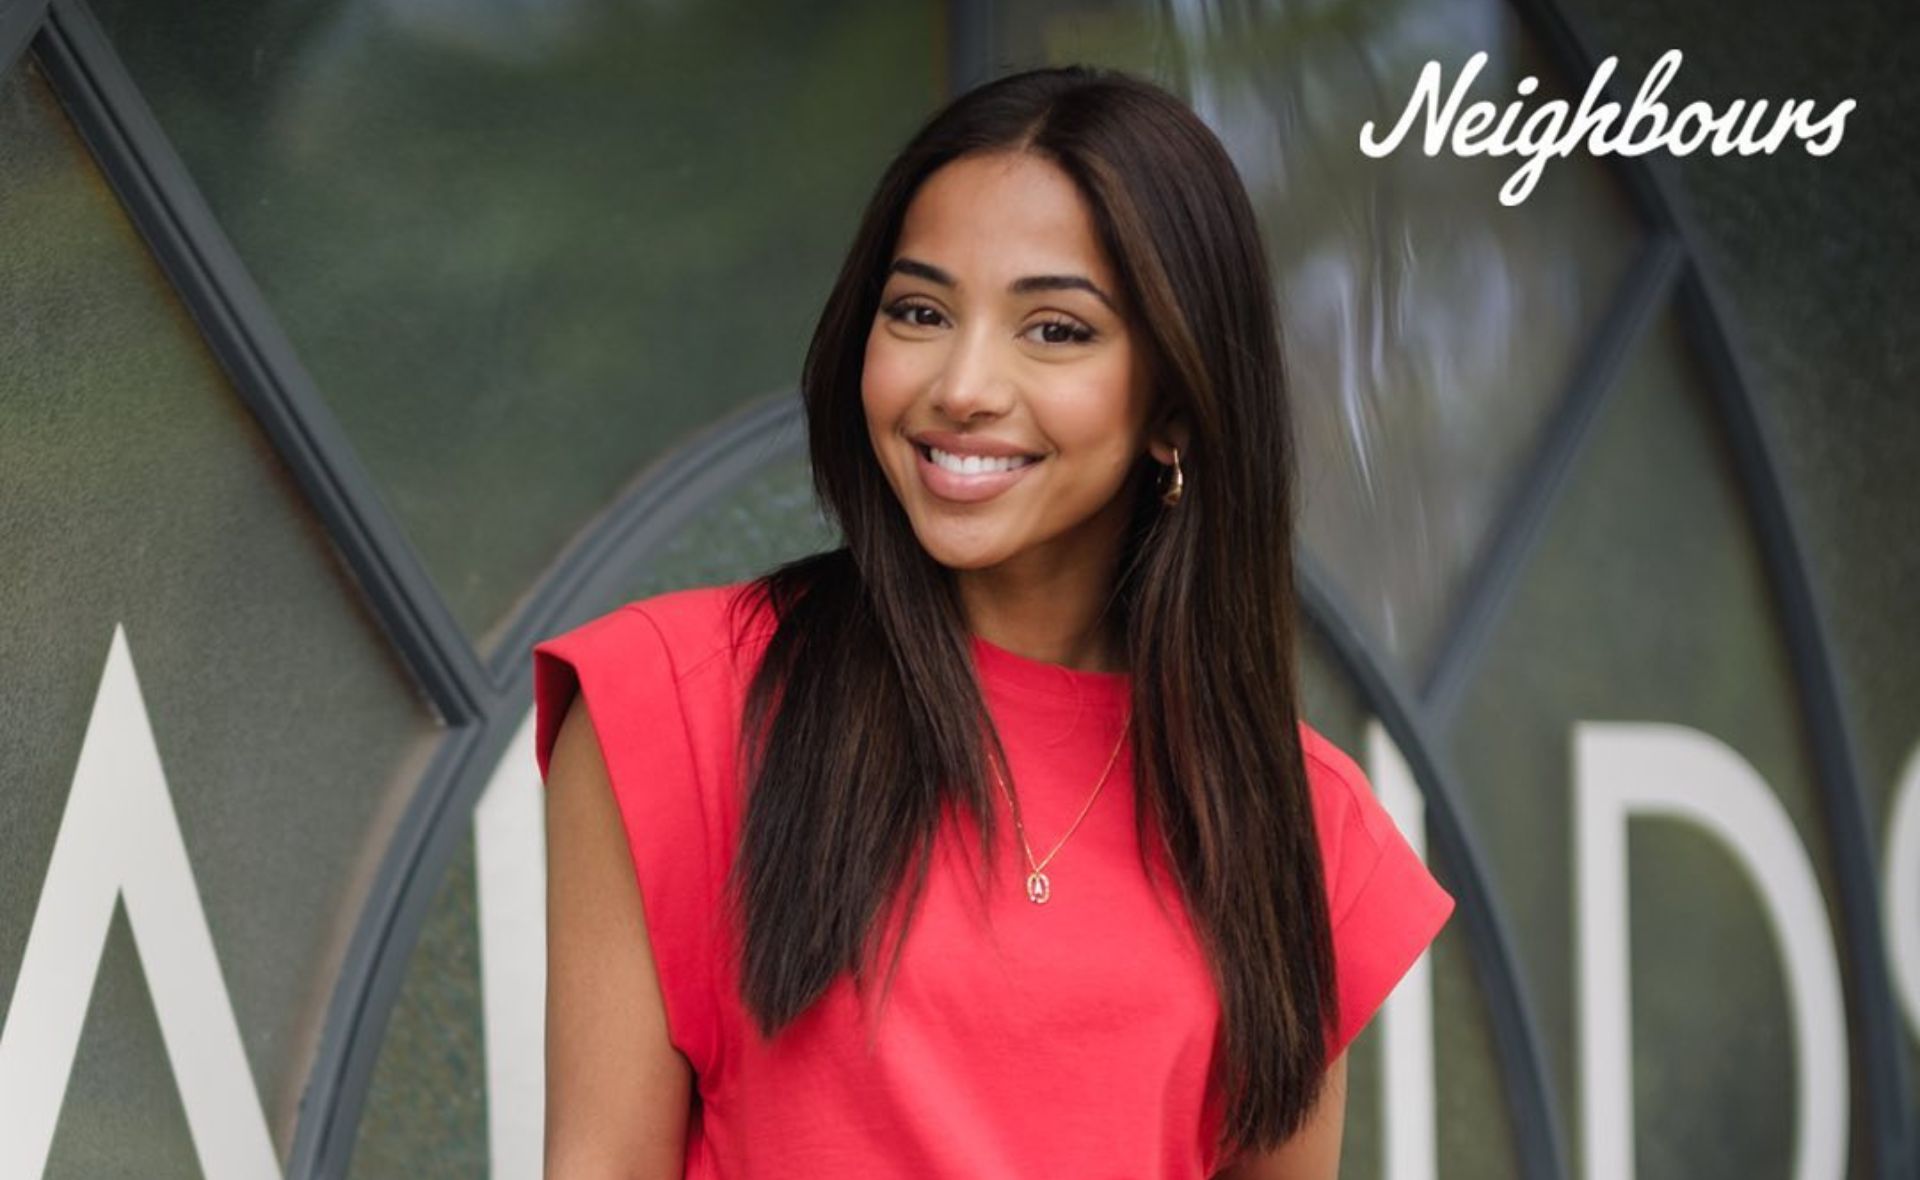 Maria Thattil speaks on her “surreal” debut on Neighbours as Amira